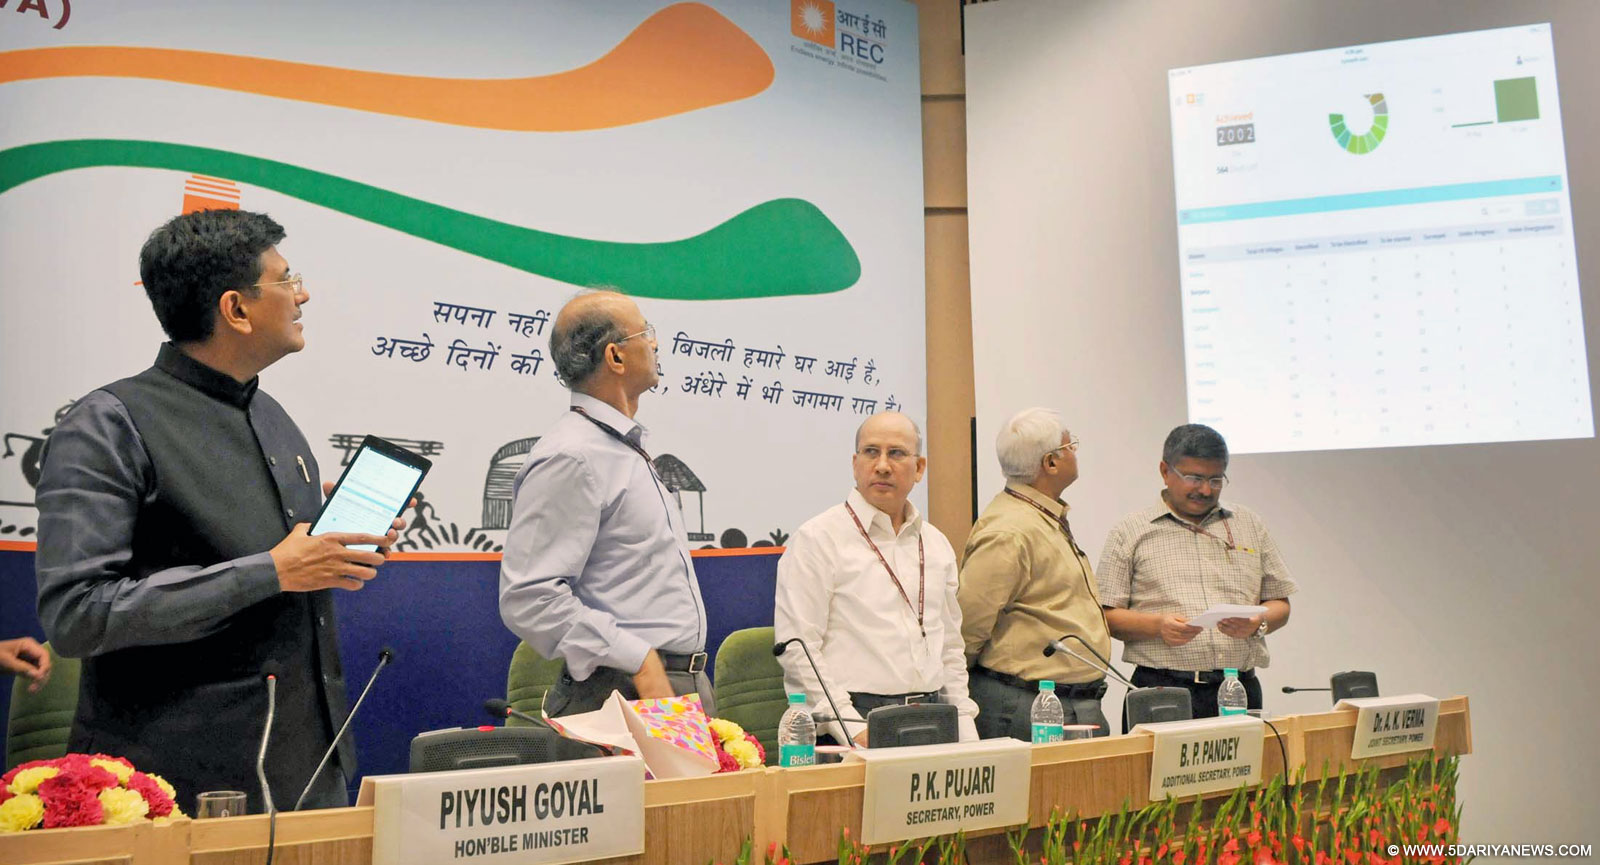 The Minister of State (Independent Charge) for Power, Coal and New and Renewable Energy, Shri Piyush Goyal releasing the Handbook for the Gram Vidyut Abhiyantas’ (GVAs), at a function, in New Delhi on October 14, 2015. The Secretary, Ministry of Power, Shri P.K. Pujari and other dignitaries are also seen.